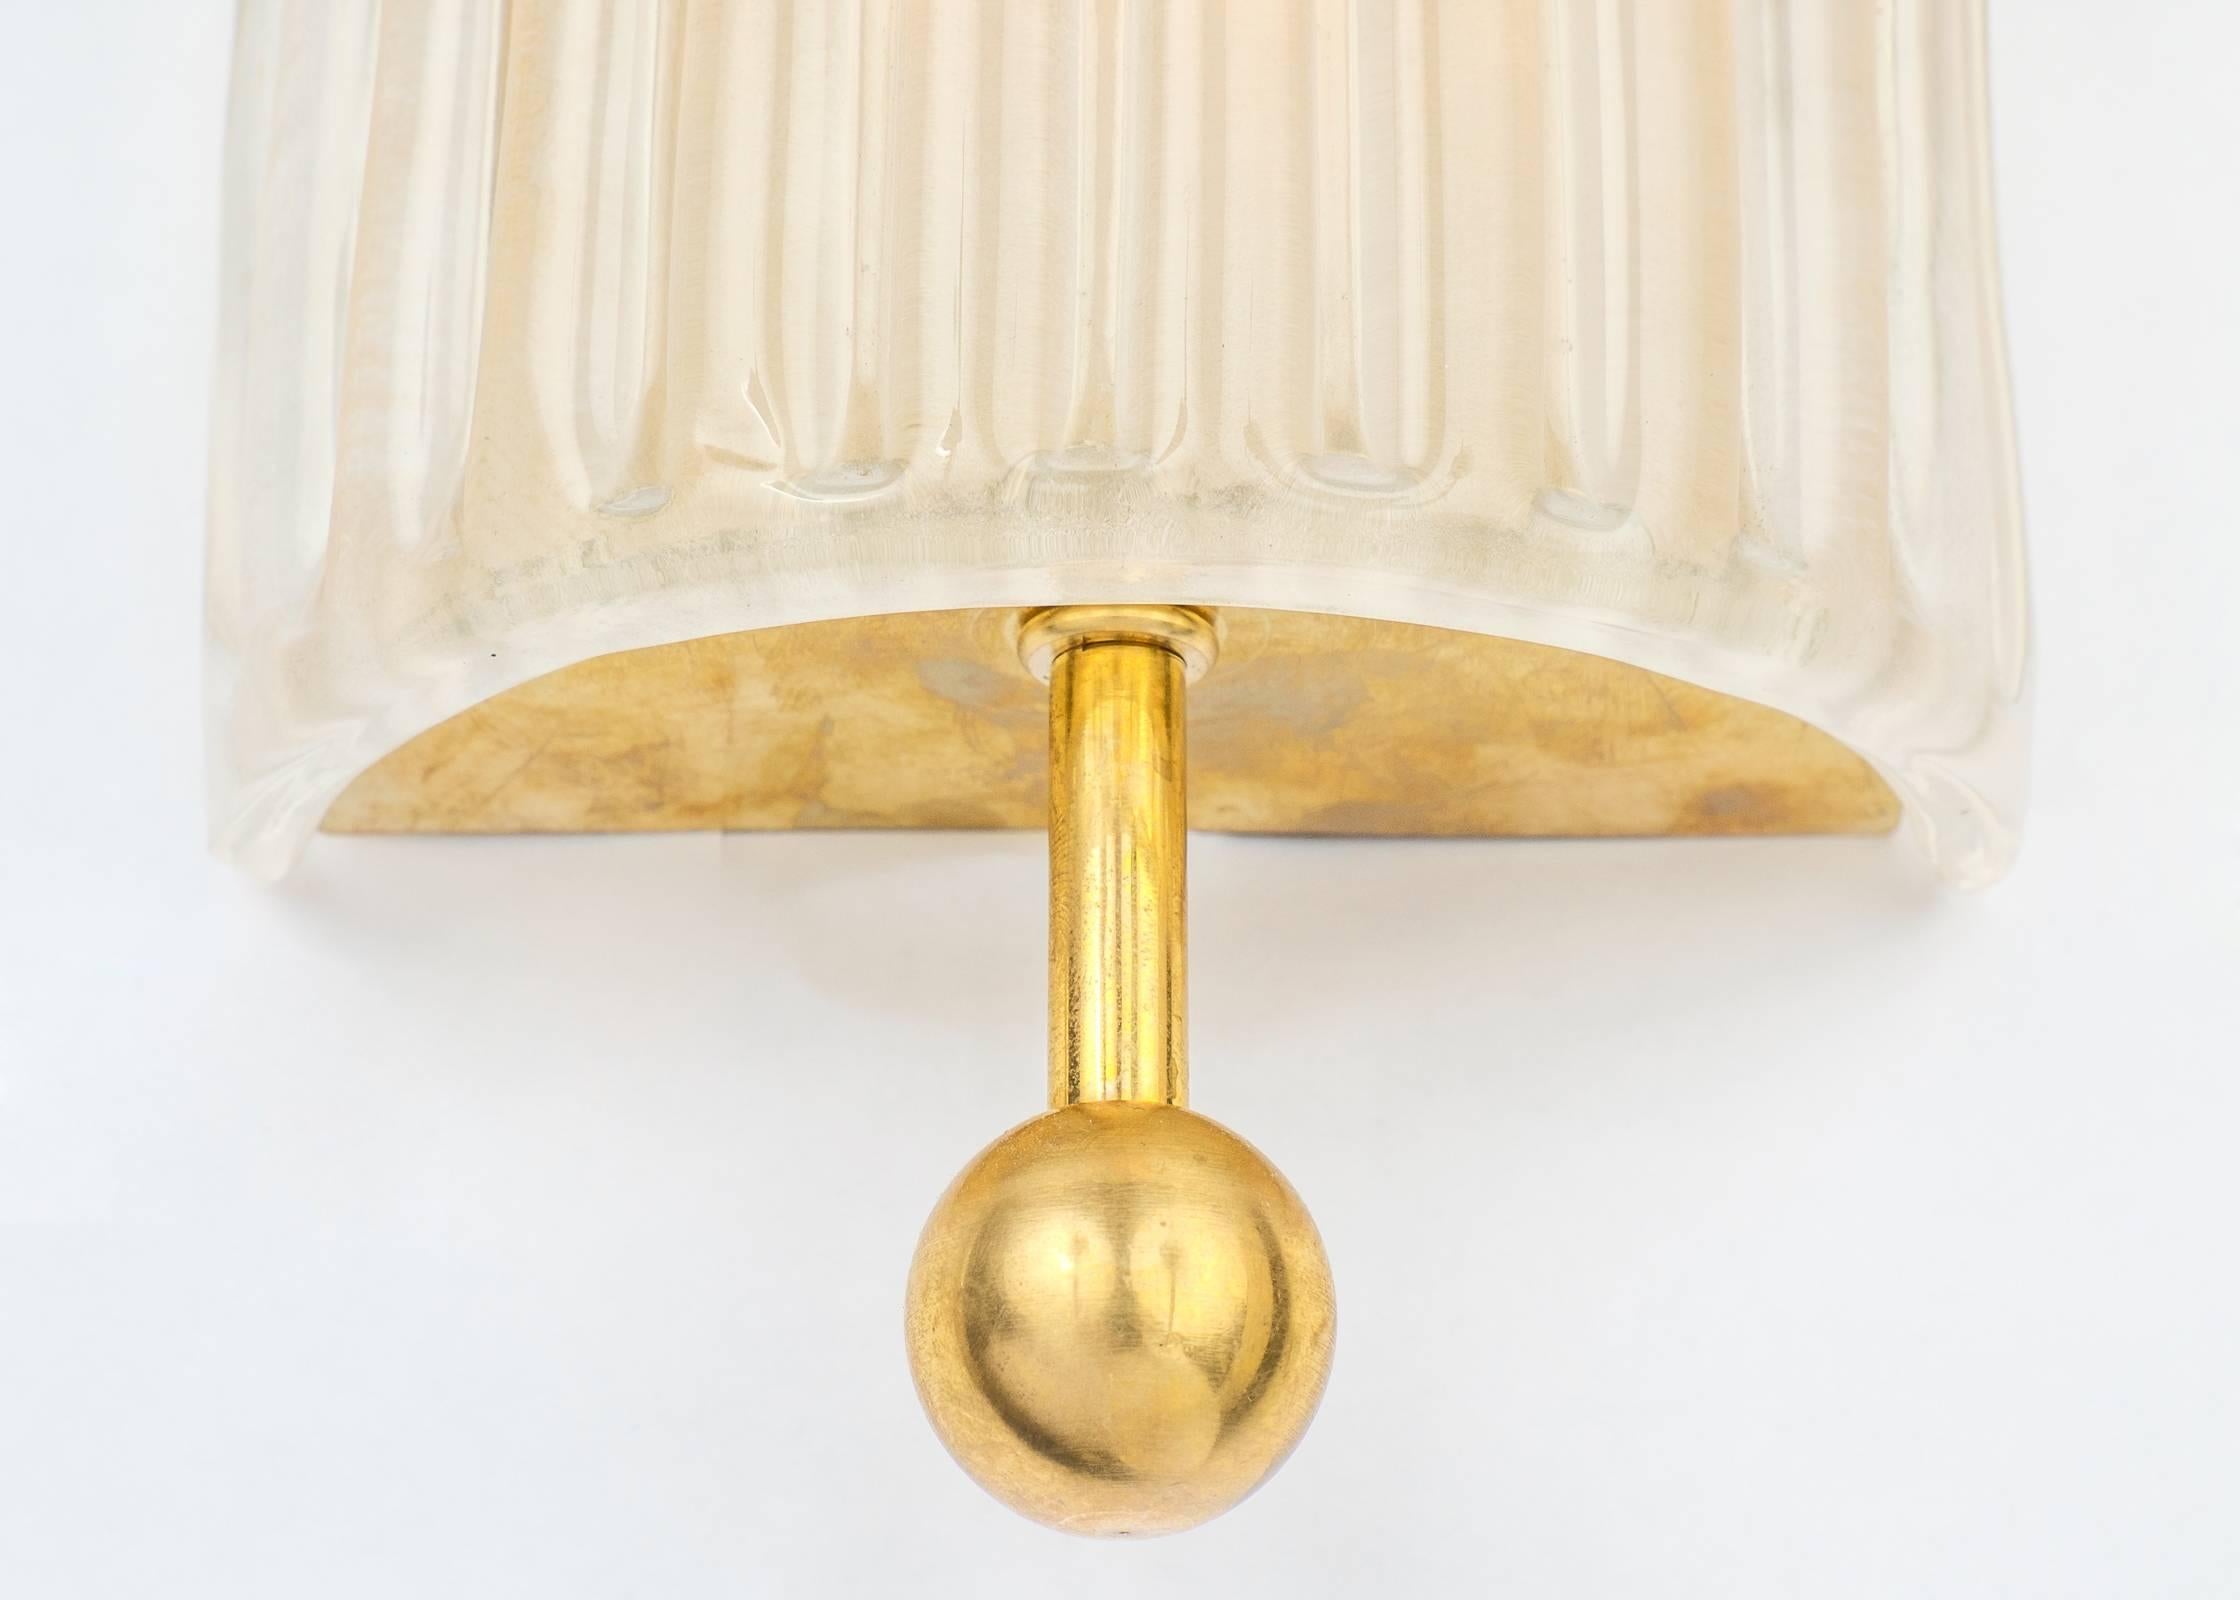 Italian Art Deco Style Murano Glass and Brass Finial Sconces